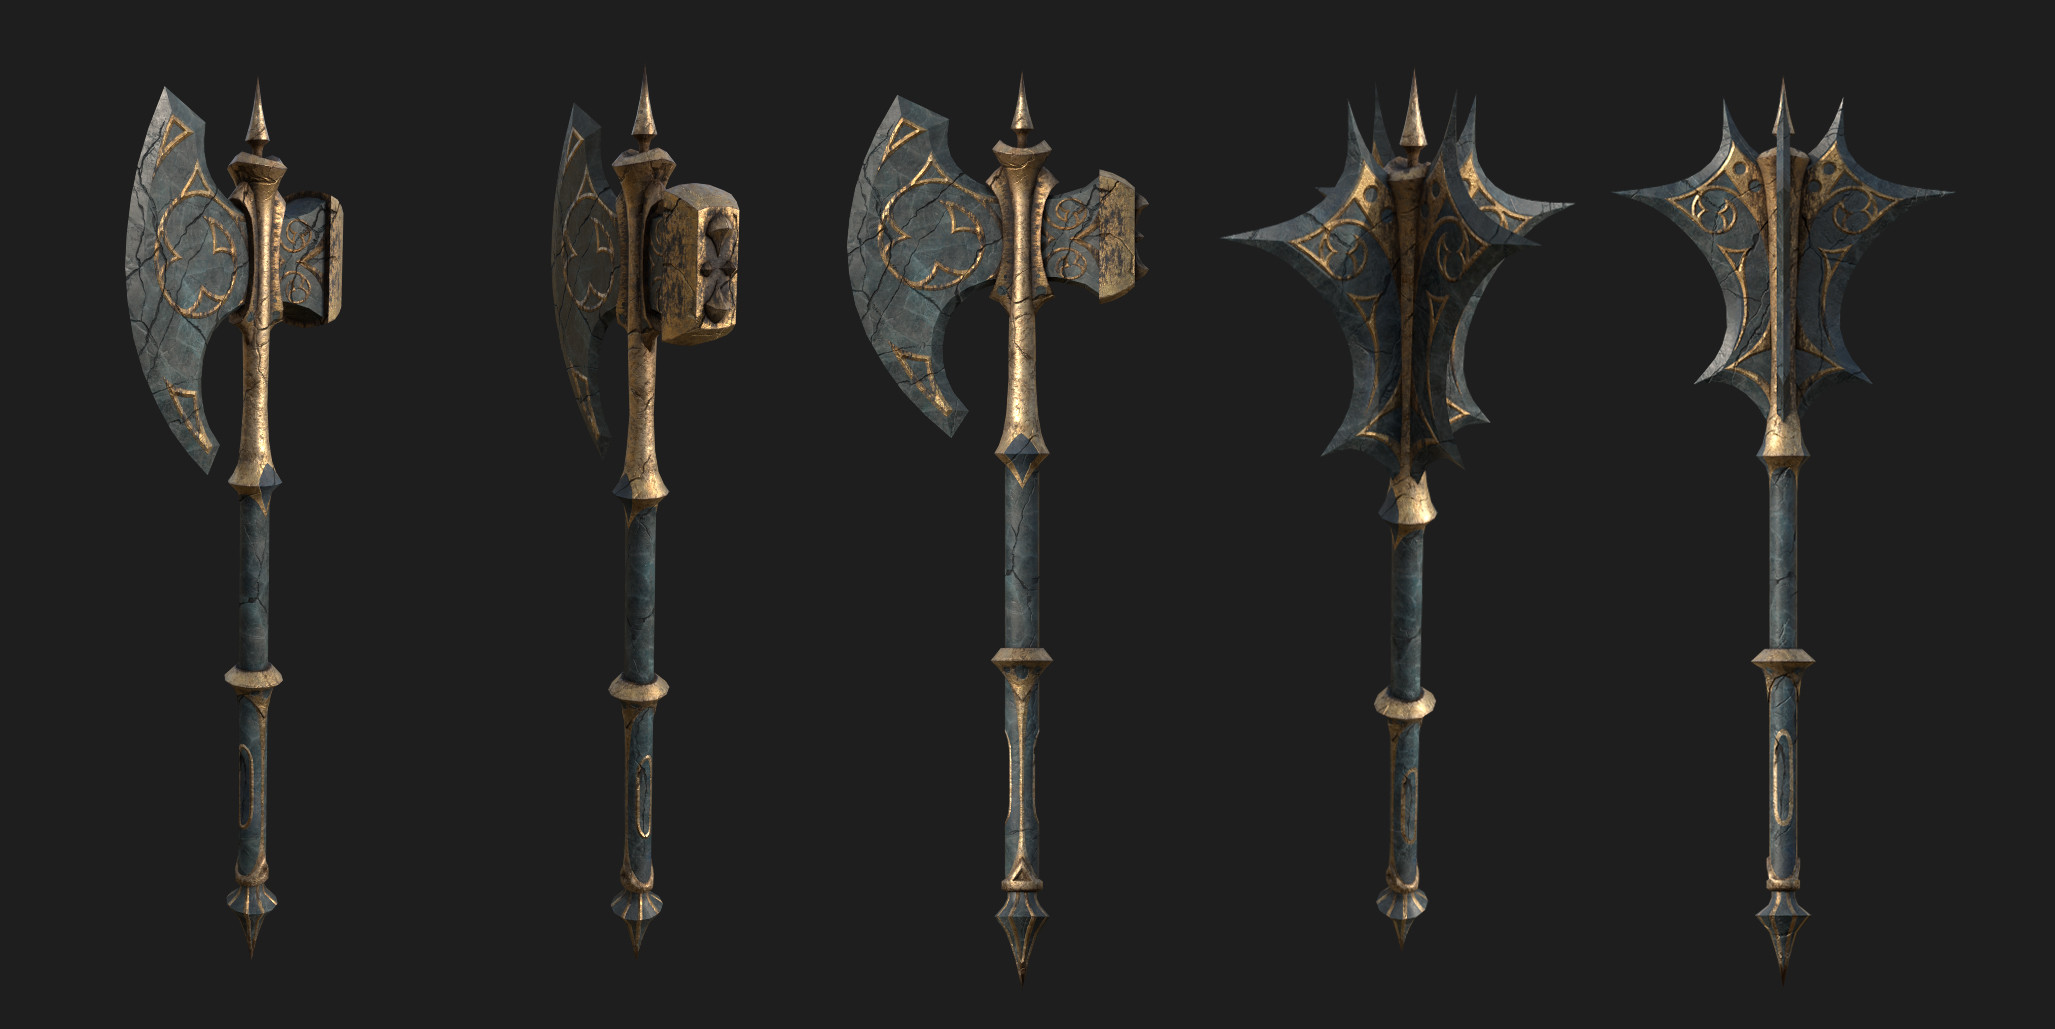 Final Axe and Mace models and textures. Matching the materials on the Guardian's themselves. 